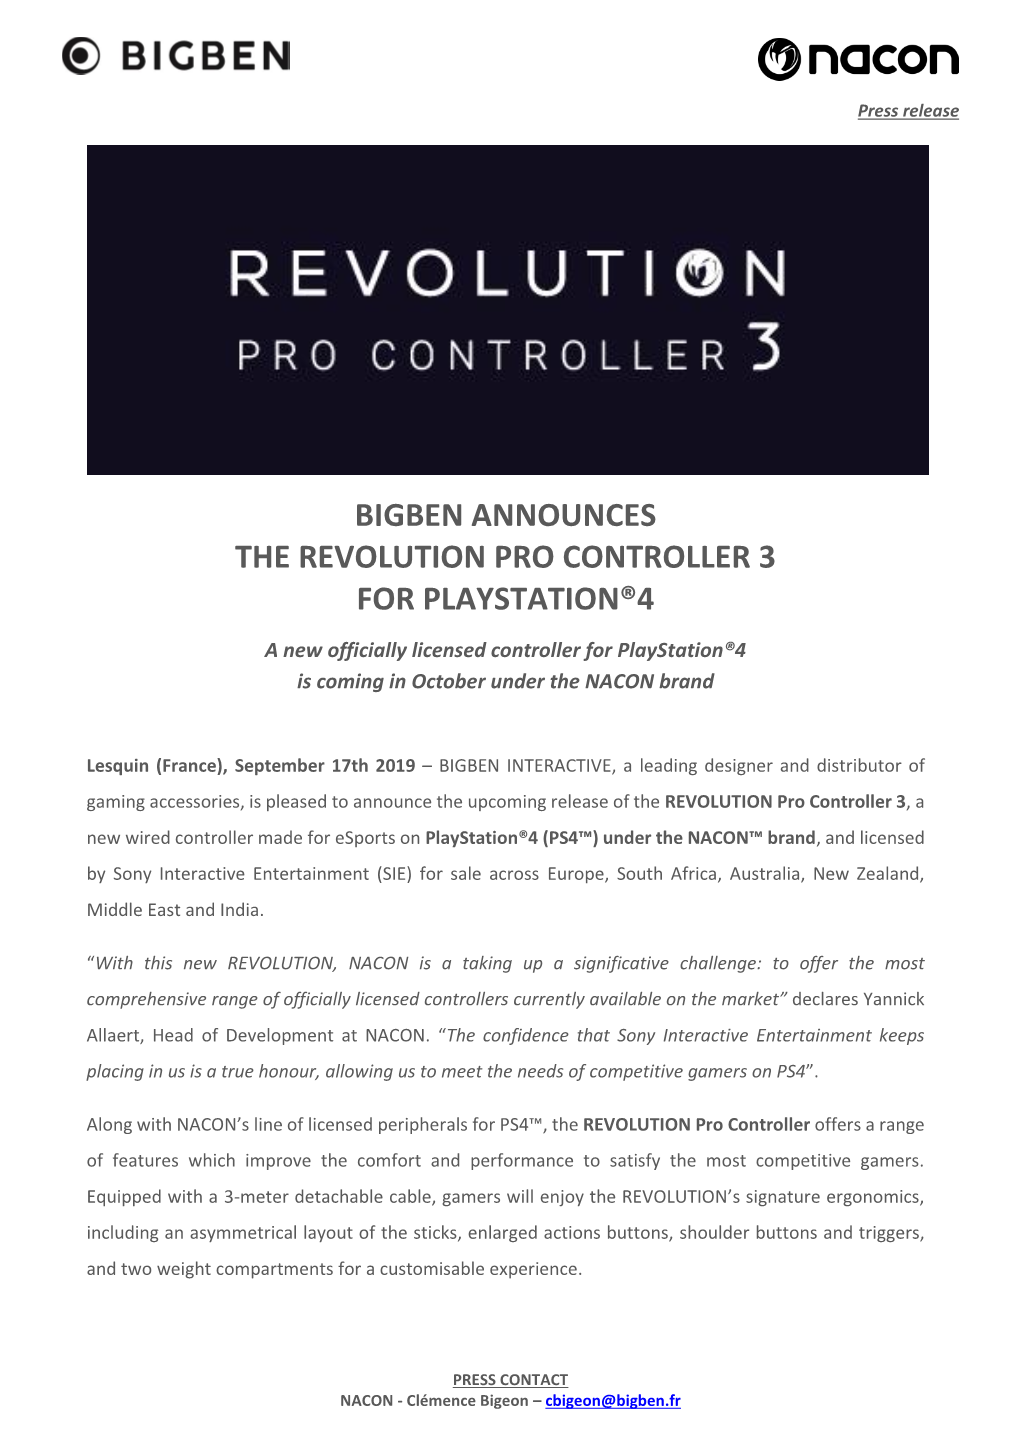 Bigben Announces the Revolution Pro Controller 3 for Playstation®4